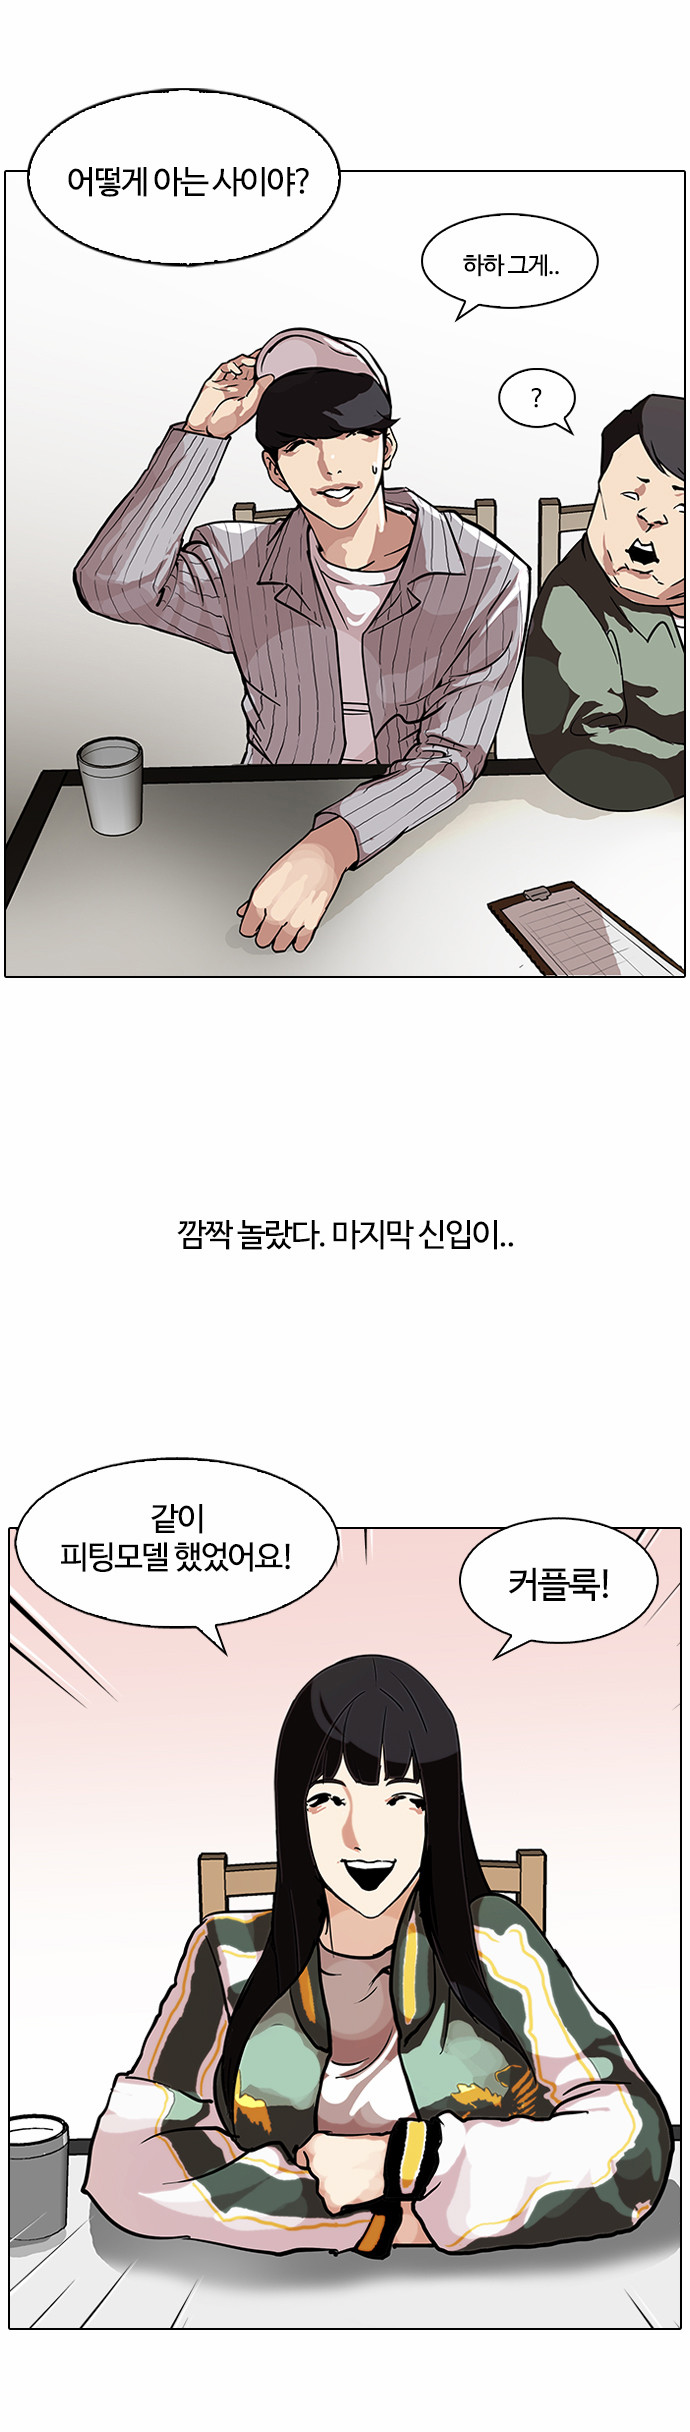 Lookism - Chapter 97 - Page 2